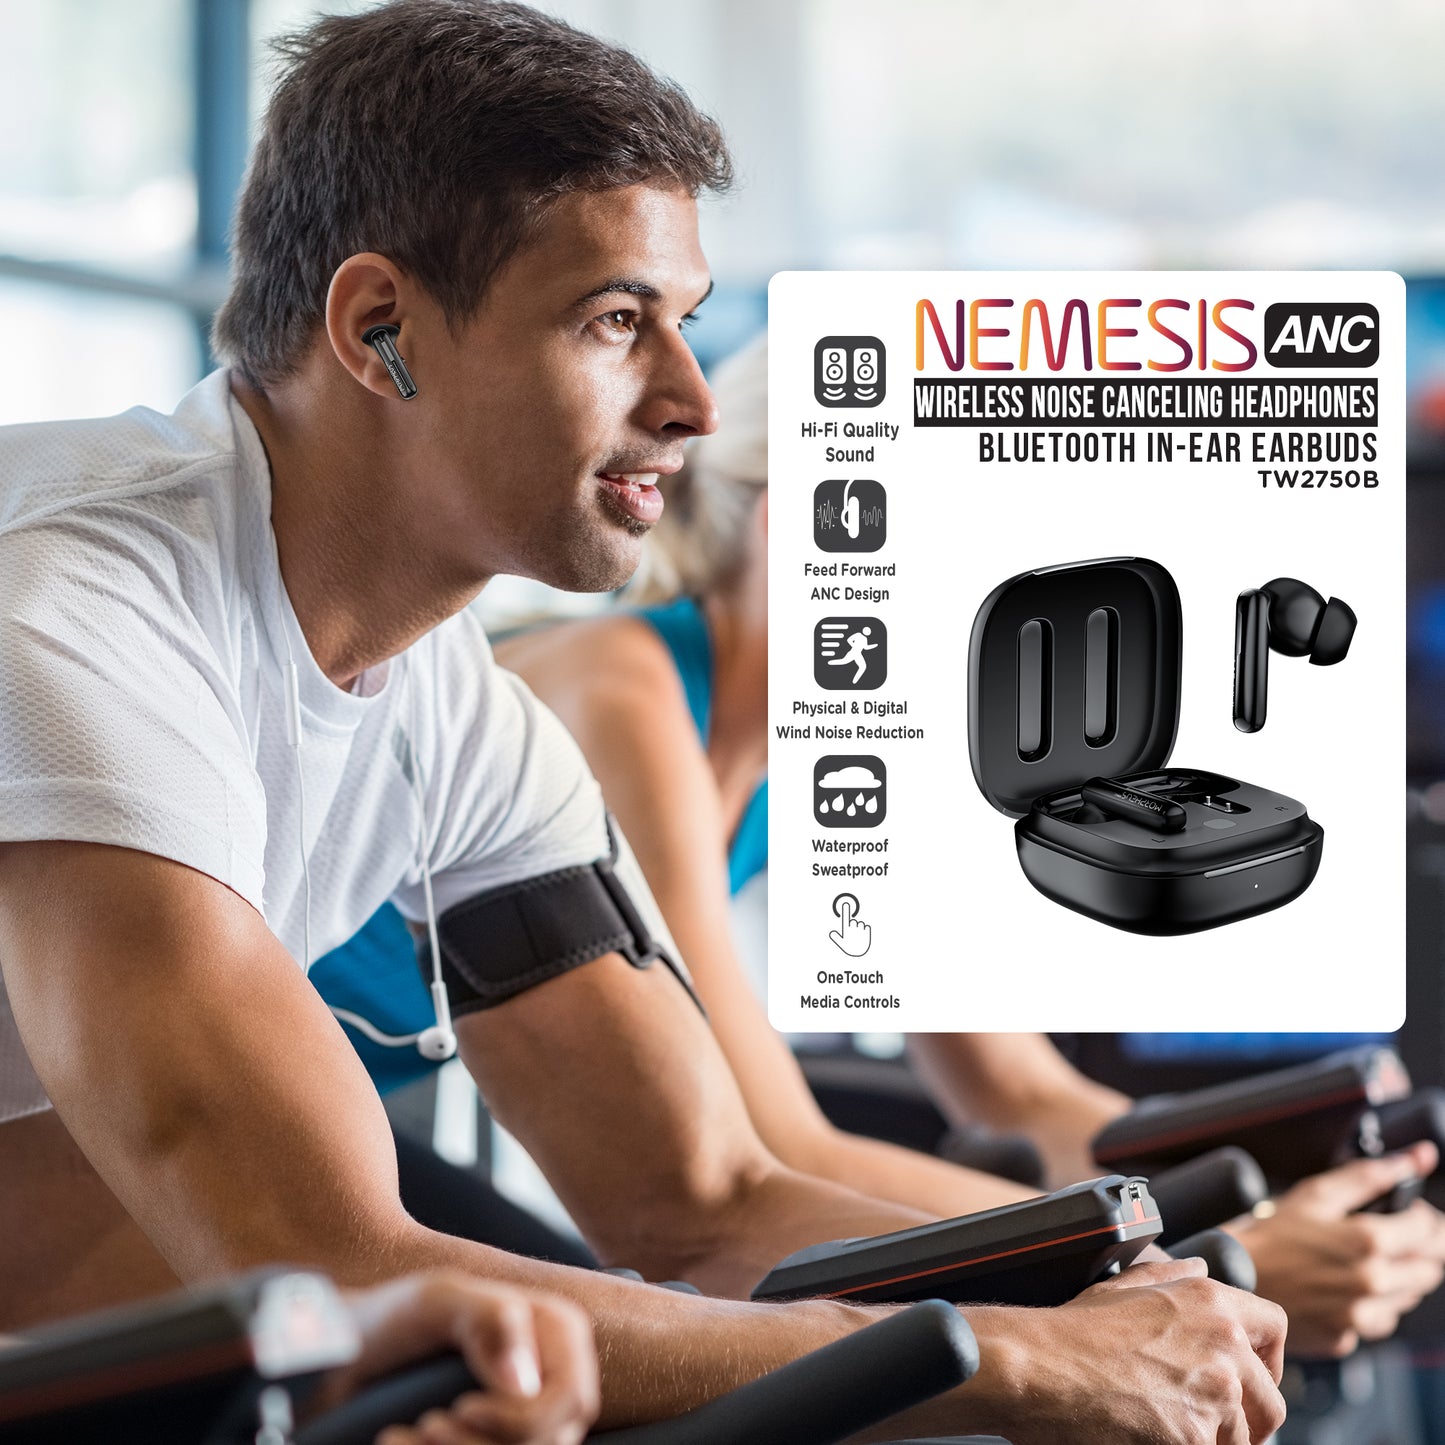 m360 Nemesis ANC Wireless Noise Cancelling Headphones - Active Noise Cancelling Bluetooth Earbuds – 4 Microphones - 30H Playtime – 10mm Graphene Dynamic Drivers Magnetic Charging Case - TW2750B